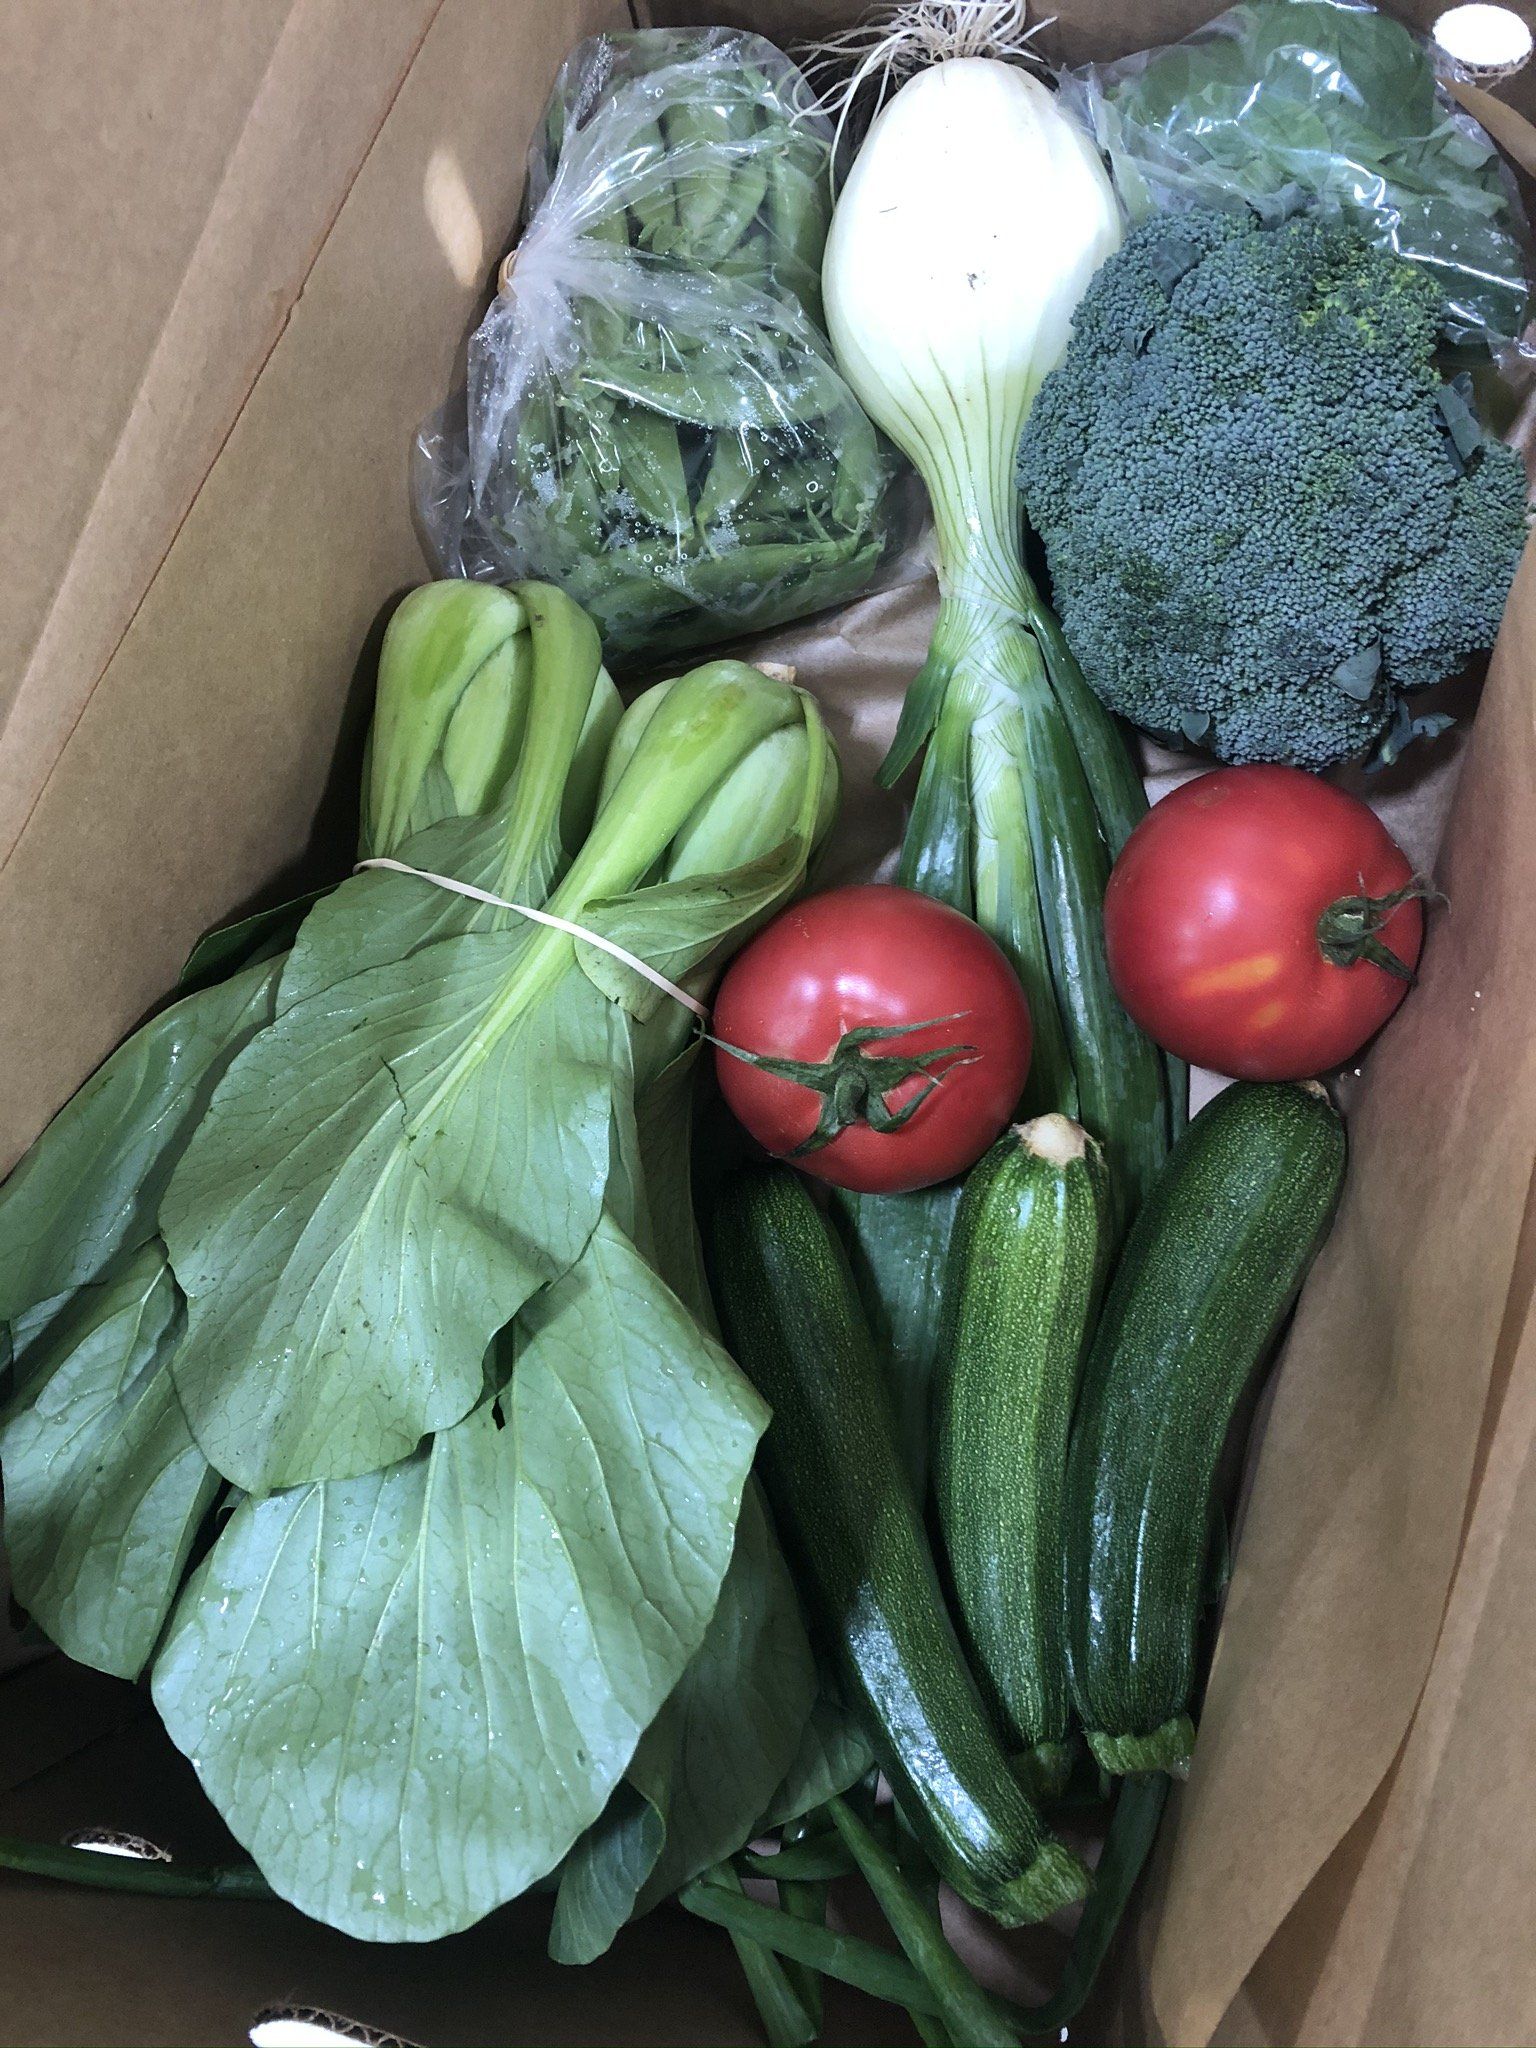 Previous Happening: Extra Produce Boxes Available This Week!